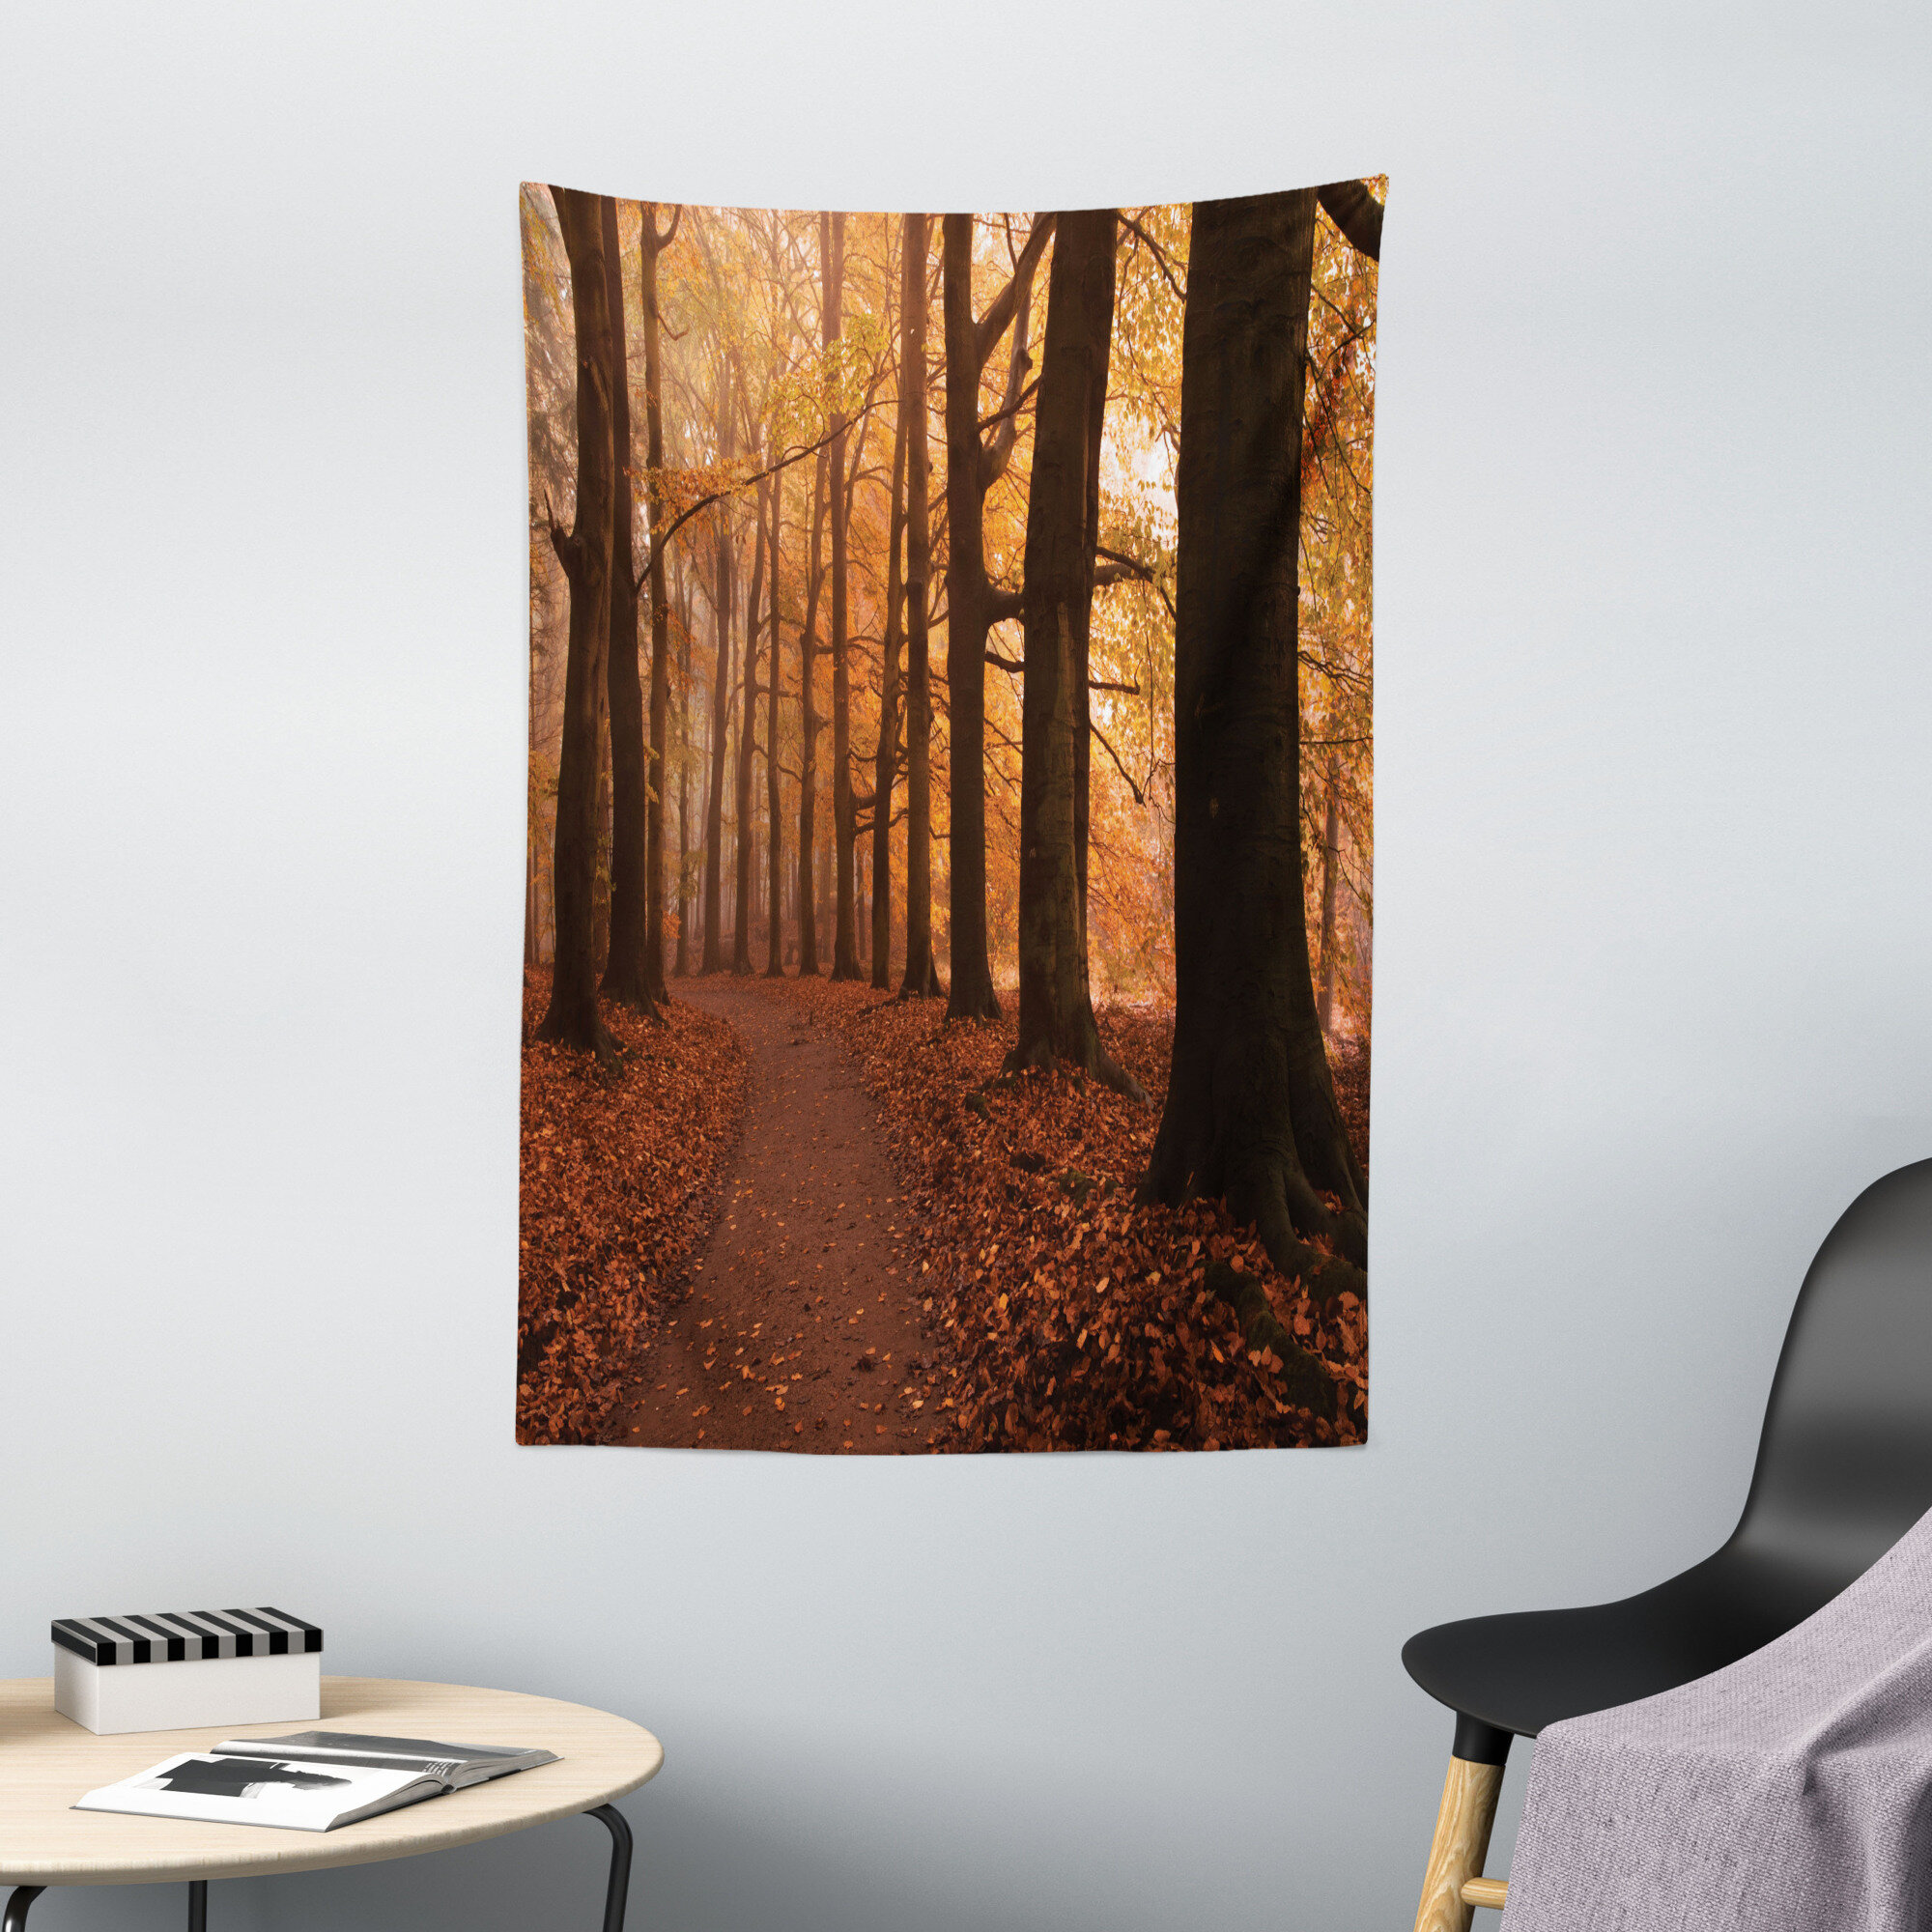 Ambesonne Forest Tapestry, Foggy Sunset Vibrant Sunbeams Rural Country Woodland in Fall Scenery Image, Wall Hanging for Bedroom Living Room Dorm Decor - 2